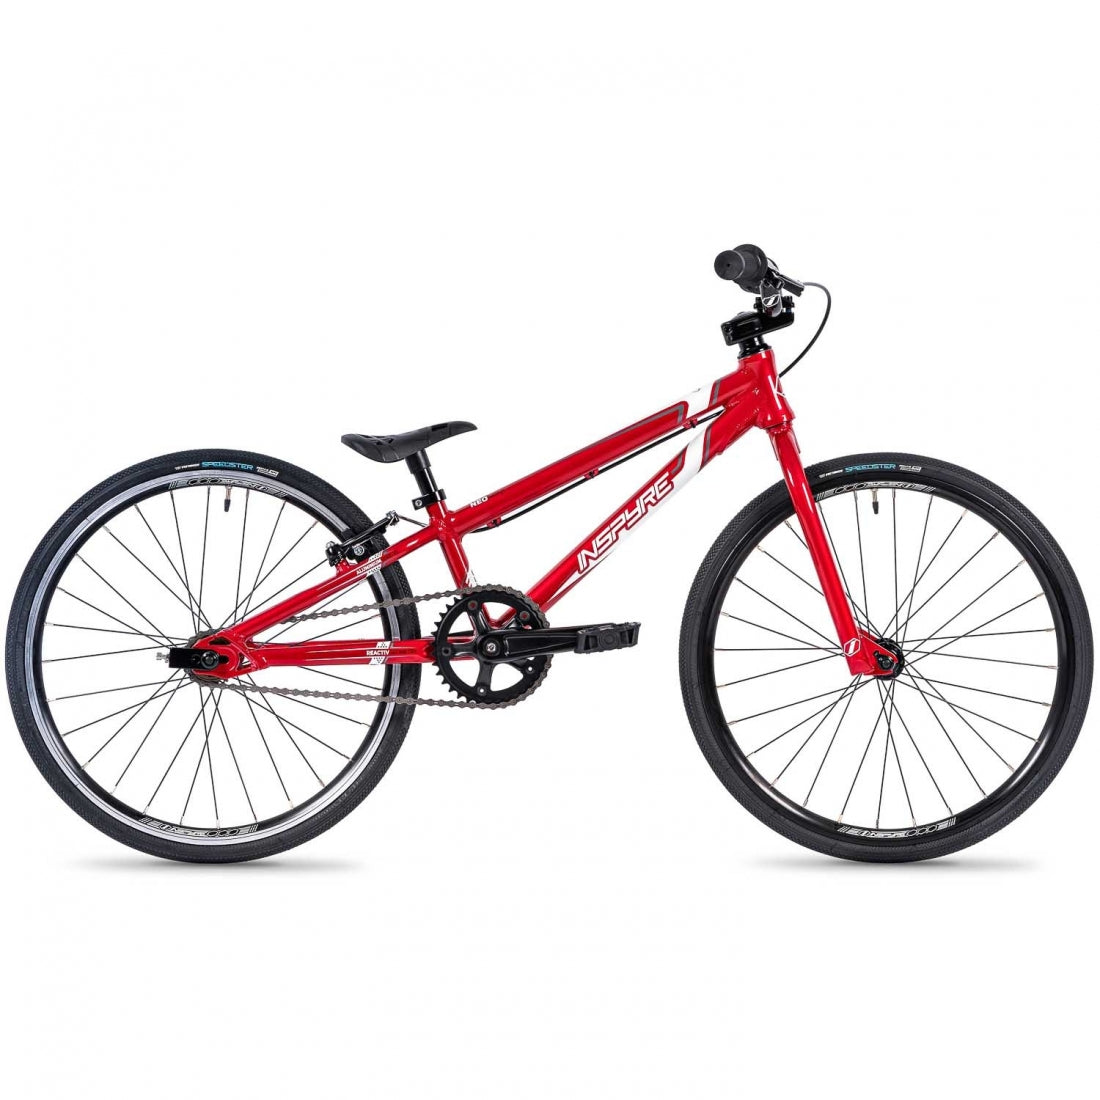 Red entry-level Inspyre Neo Mini BMX race bike against a white background.